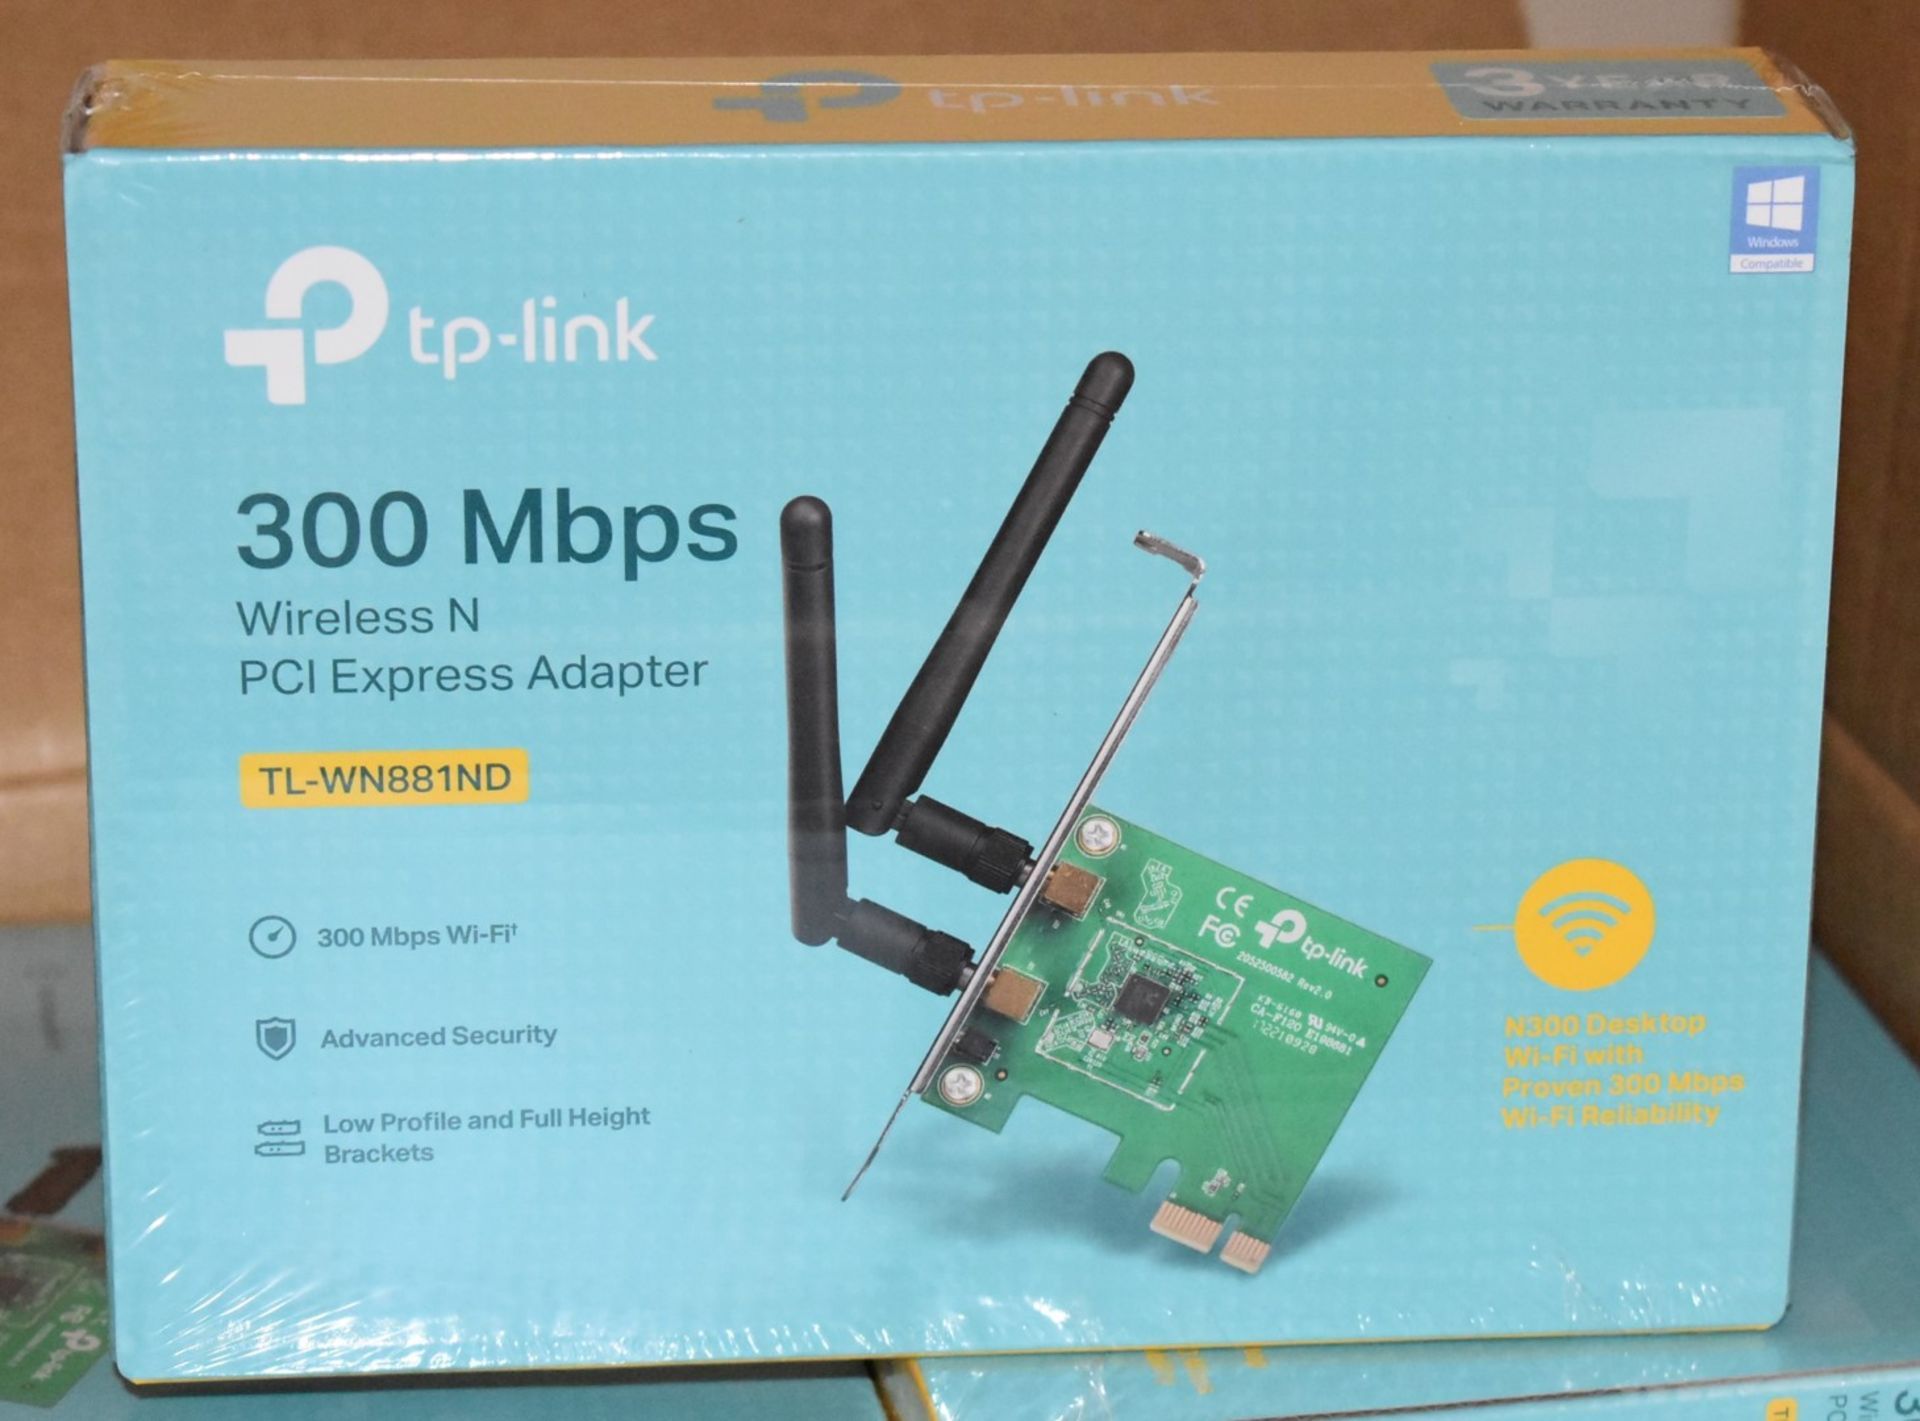 4 x TP Link 300Mbps Wireless N PCI Express Adapters - TL-WN881ND - New Sealed Stock - Image 6 of 6